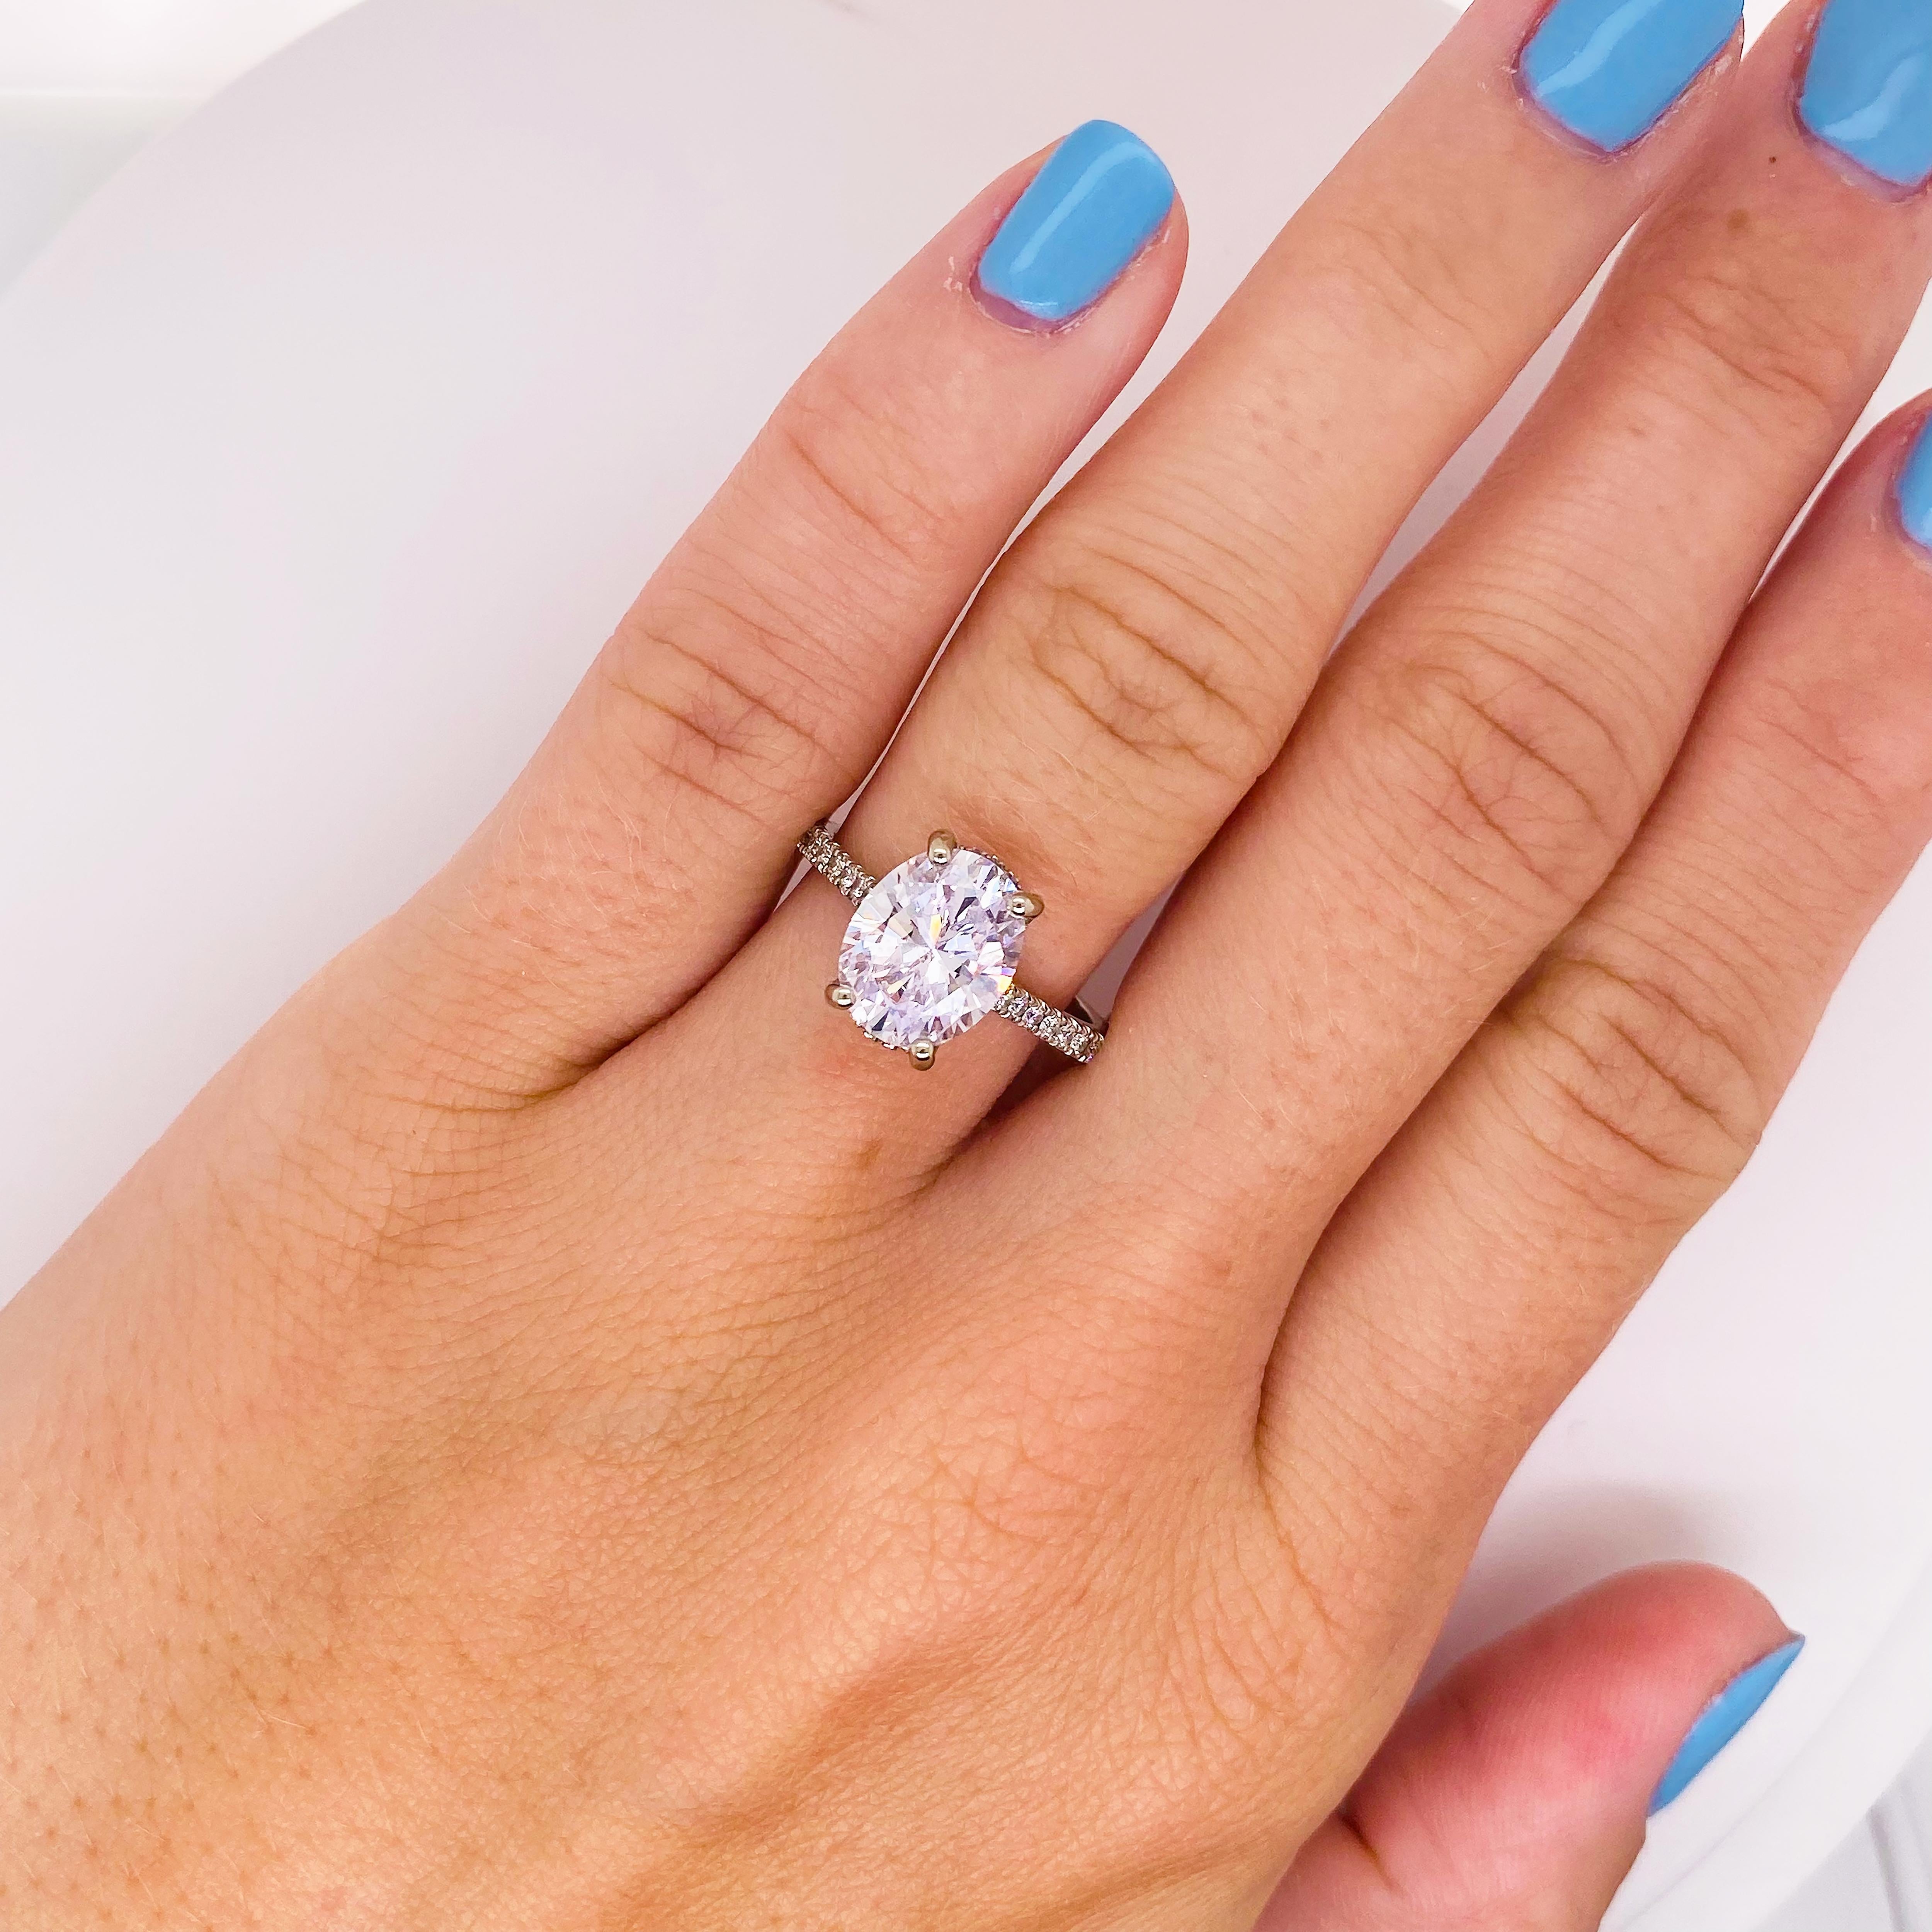 GORGEOUS, STUNNING, BREATHTAKING doesn't begin to describe the 3.5-carat oval diamond! With great quality and color and size this diamond will look great on anyone! The center oval diamond will come with an official certificate and certified jewelry